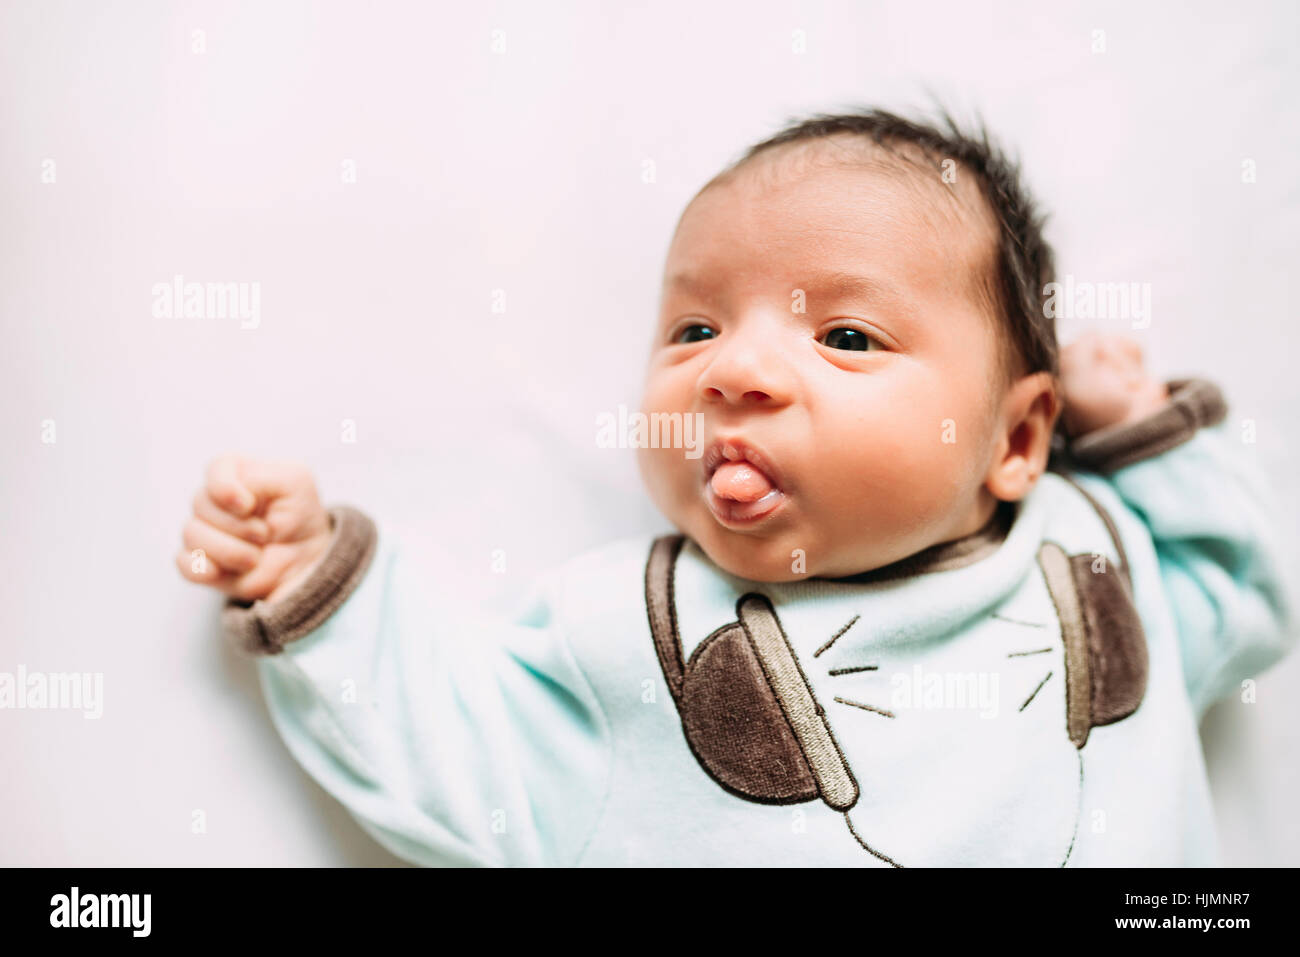 Newborn baby girl lying on bed sticking out tongue Banque D'Images